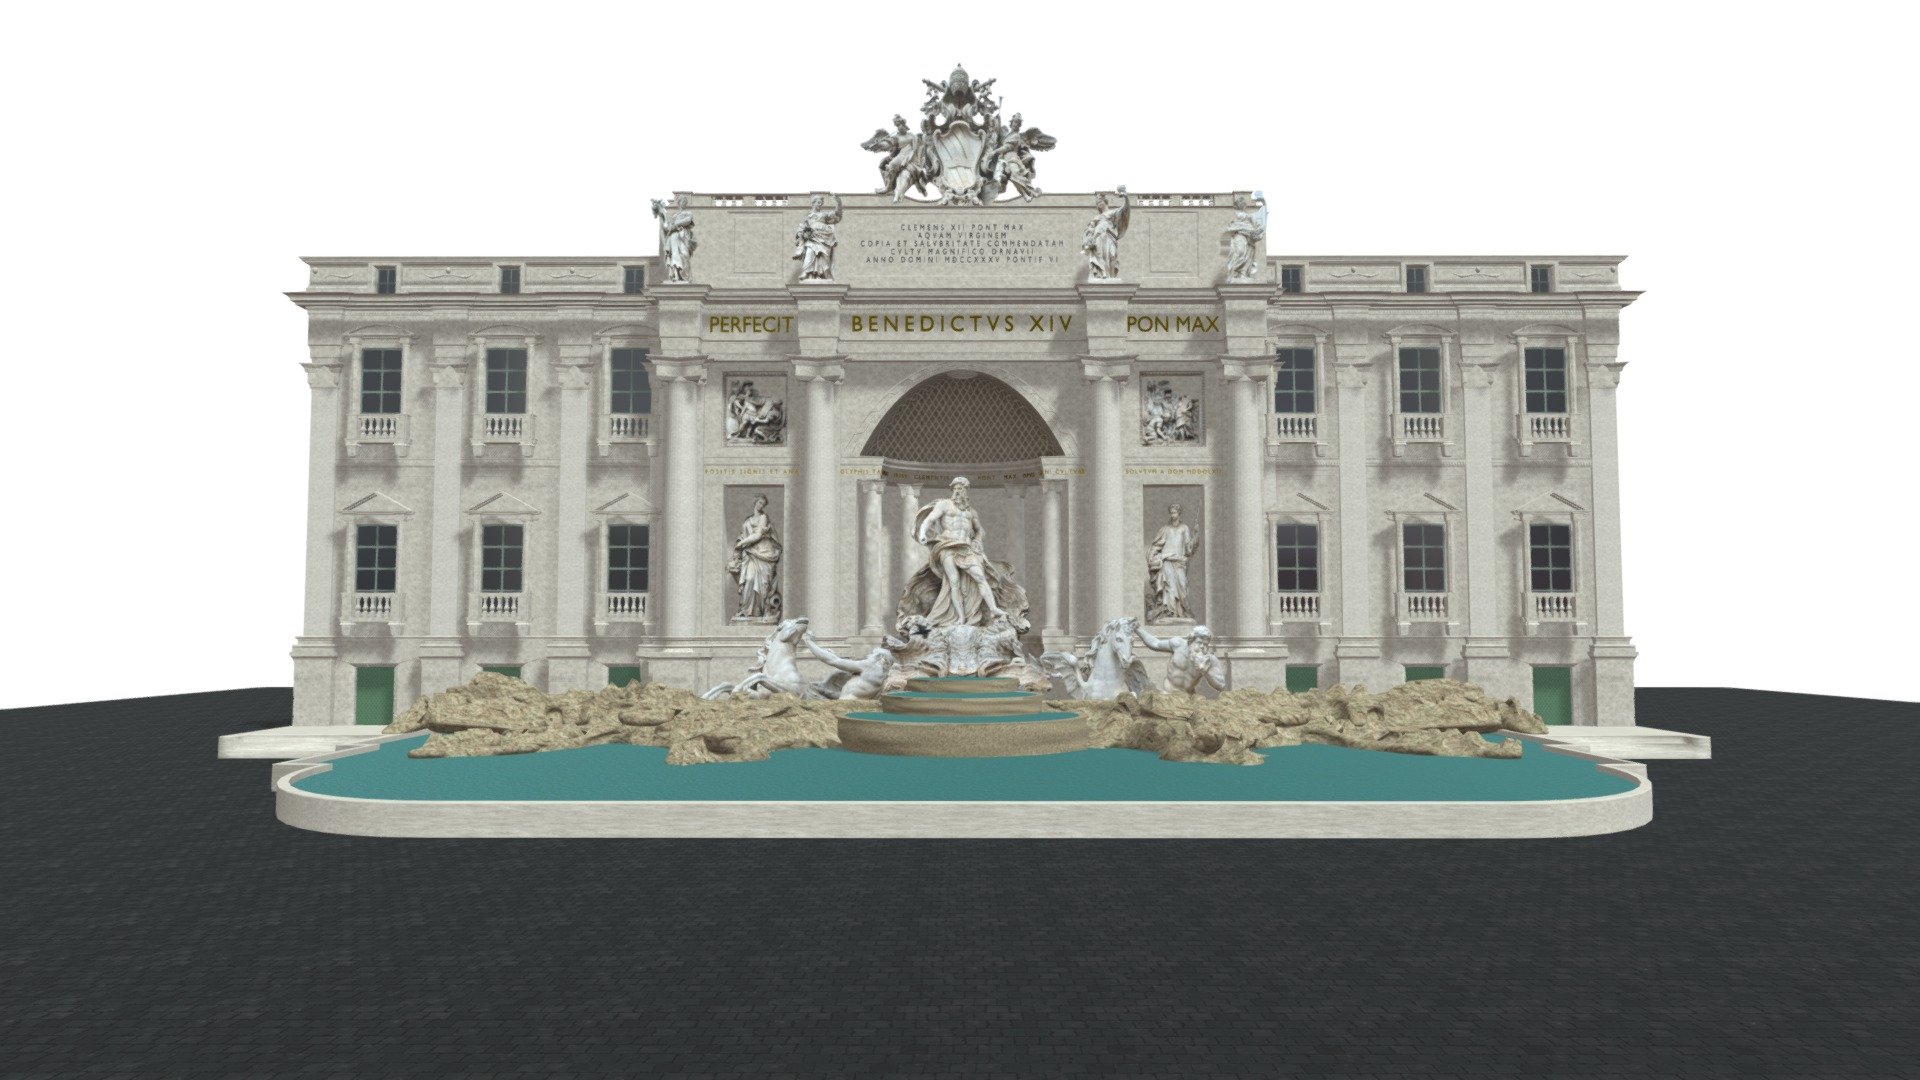 3D model of Trevi Fountain in Rome, Italy

Made in Blender

Unwrapped, good for close-up shots

Medium-poly



The Trevi Fountain (Italian: Fontana di Trevi) is an 18th-century fountain in the Trevi district in Rome, Italy, designed by Italian architect Nicola Salvi and completed by Giuseppe Pannini and several others. Standing 26.3 metres (86 ft) high and 49.15 metres (161.3 ft) wide, it is the largest Baroque fountain in the city and one of the most famous fountains in the world.
The fountain has appeared in several films, including Roman Holiday (1953); Three Coins in the Fountain (1954); Federico Fellini's classic, La Dolce Vita (1960); Sabrina Goes to Rome (1998); and The Lizzie McGuire Movie (2003) 3d model